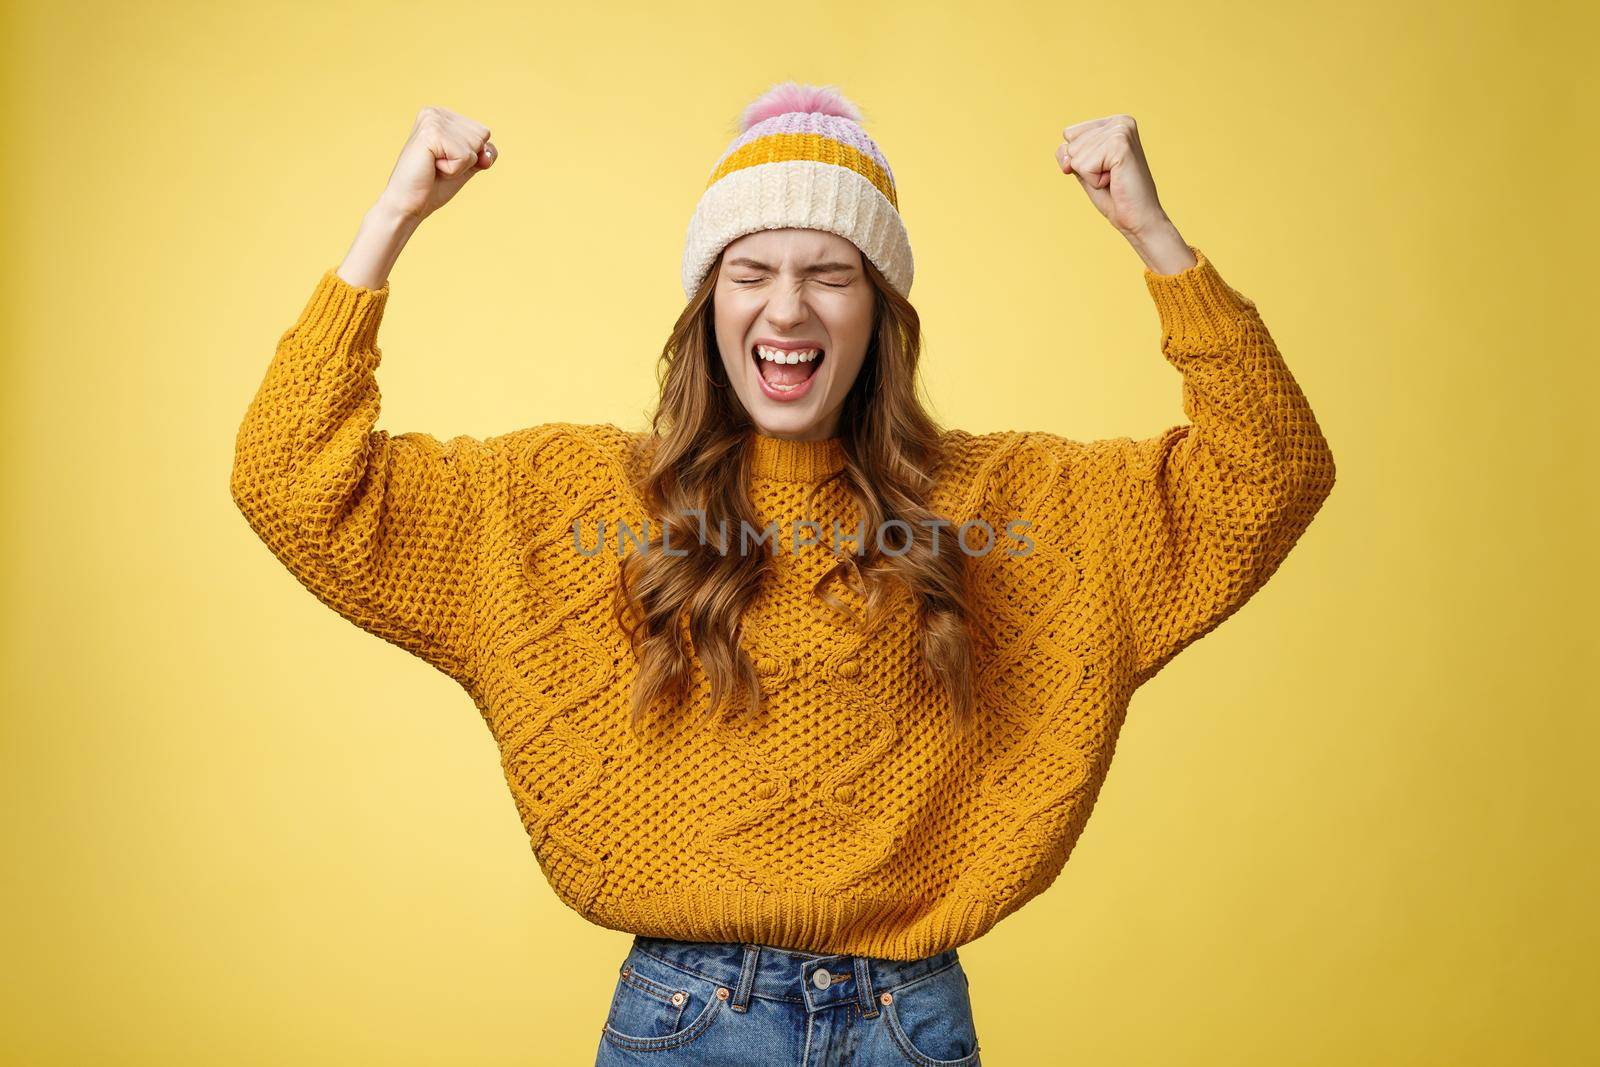 Relieved attractive fashionable university female student yelling proudly raise clenched fists victory cheer gesture celebrating win successful achievement accomplishment goal, yellow background.